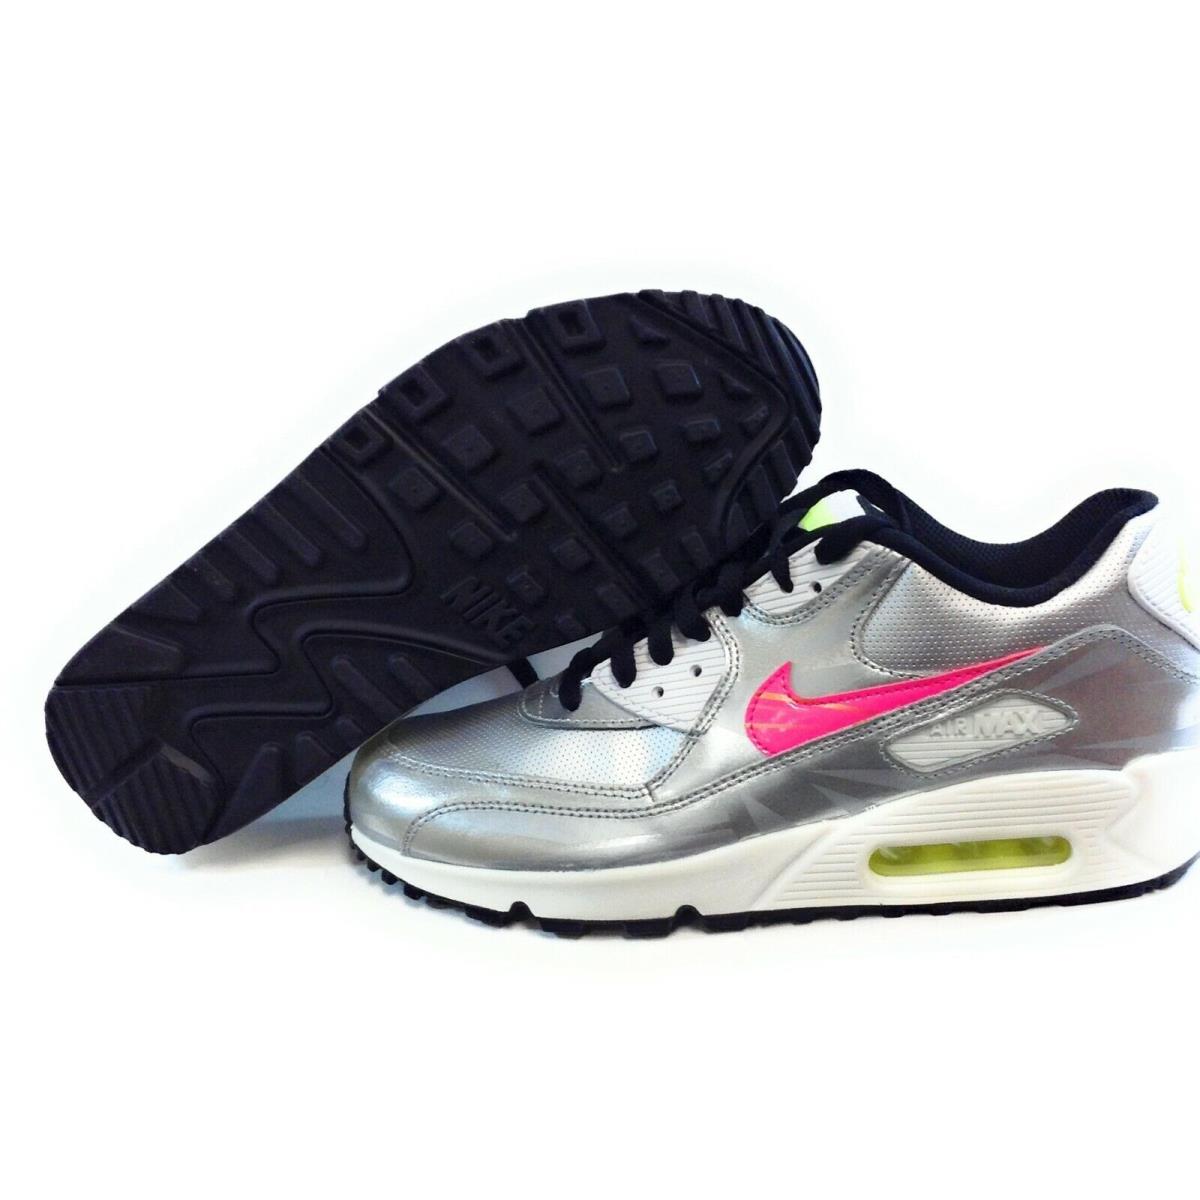 Girls Kids Youth Nike Air Max 90 FB 705392 001 Silver 2014 DS Sneakers Shoes